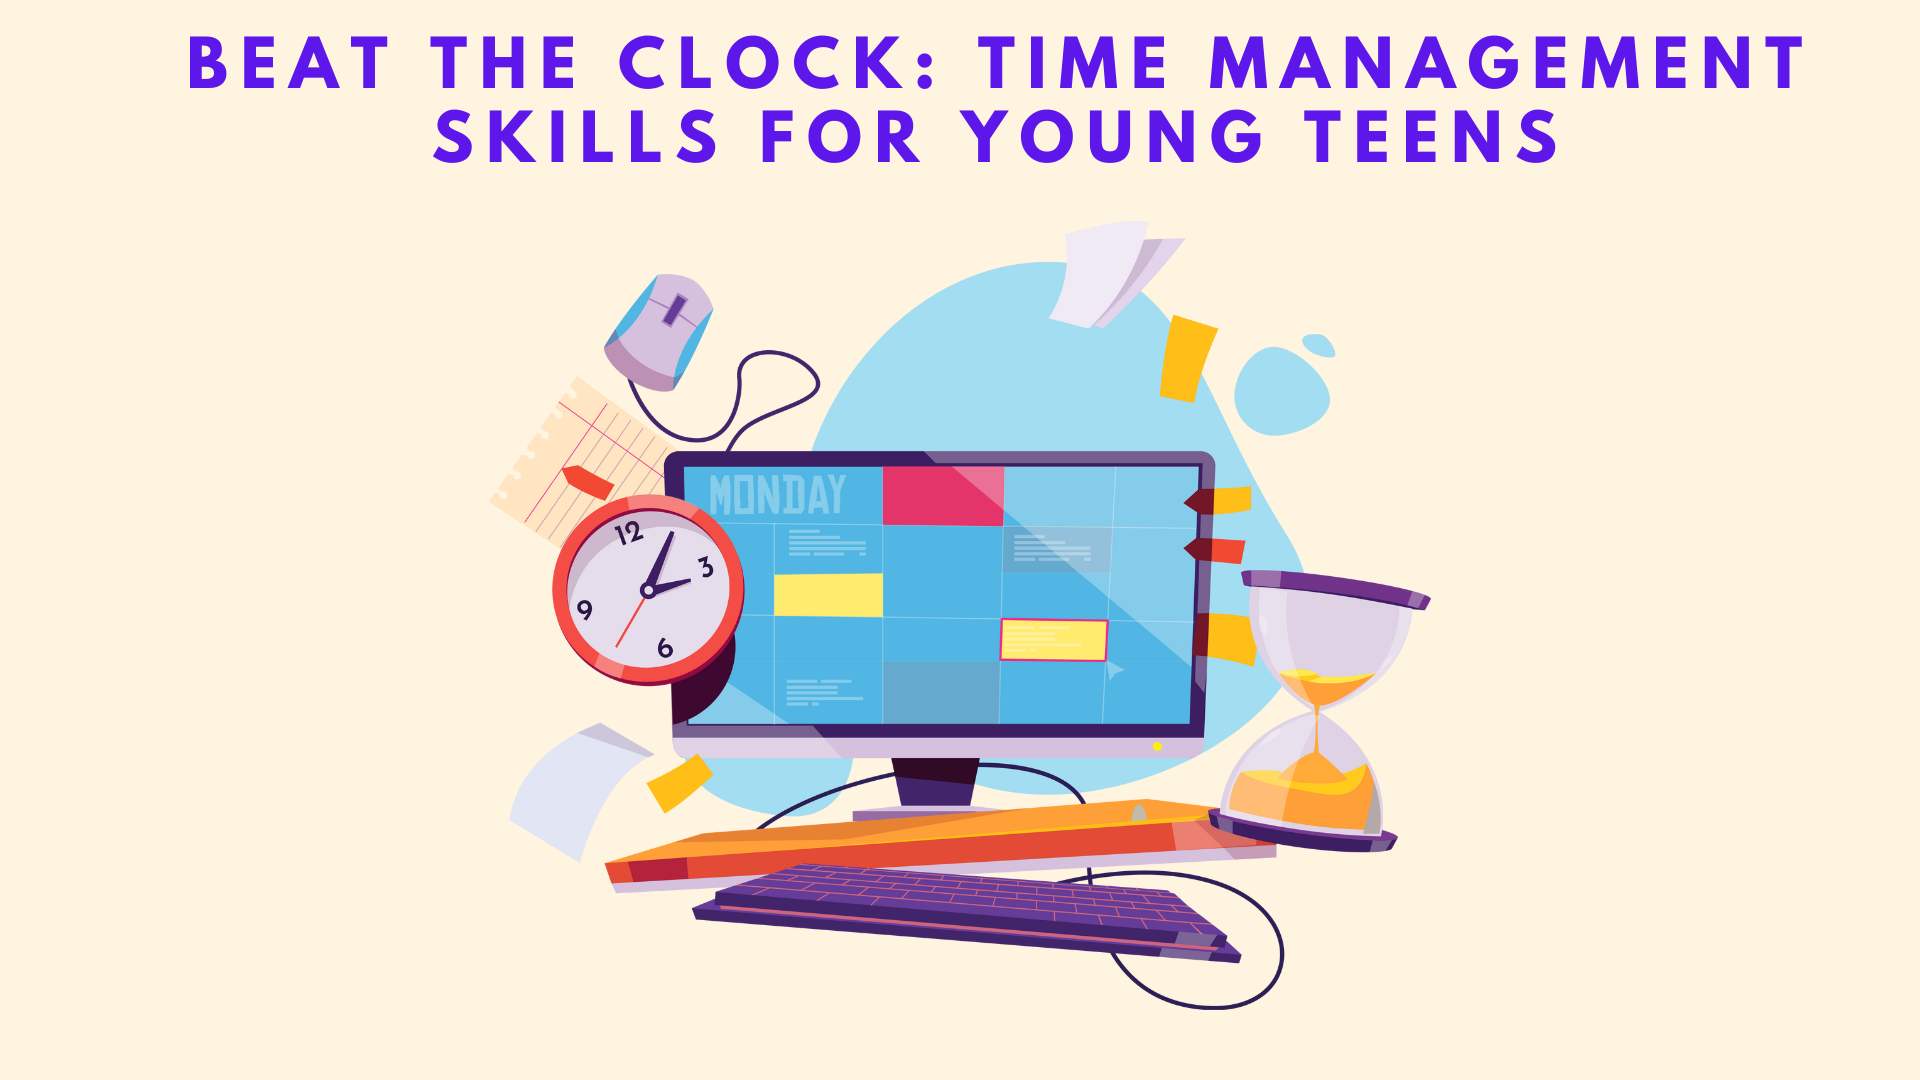 Beat the Clock: Time Management Skills for Young Teens